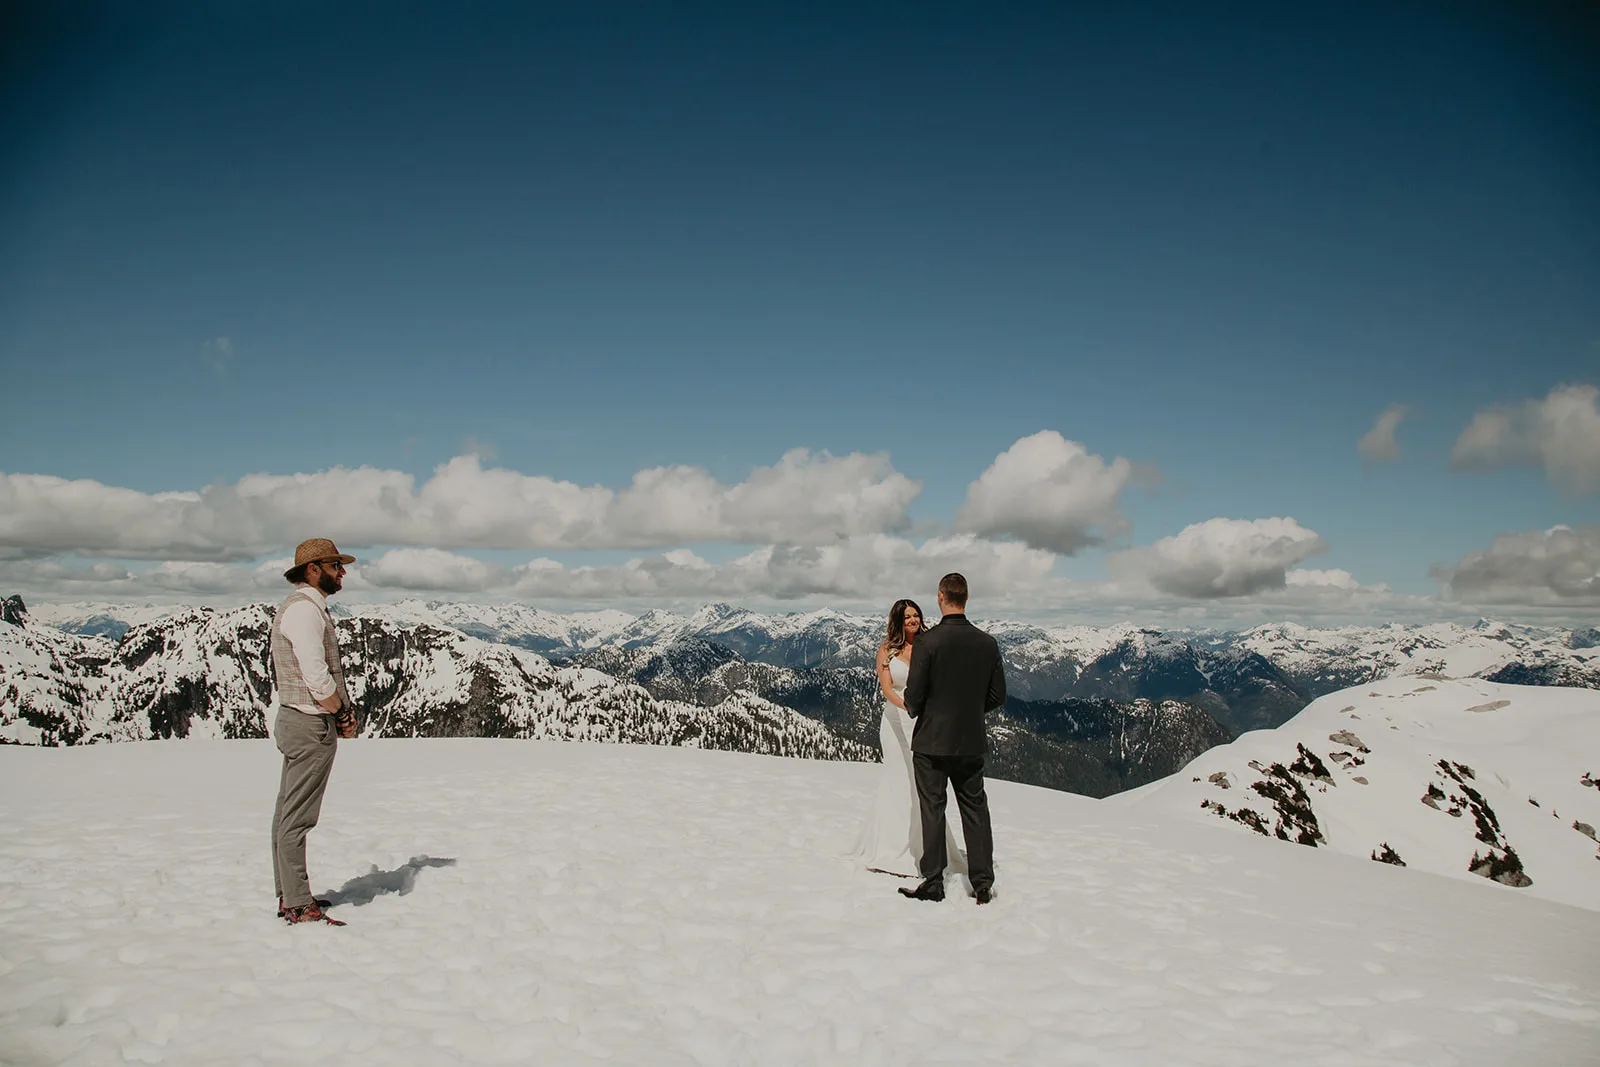 Shawn Miller officiating a helicopter elopement on a snowy mountaintop